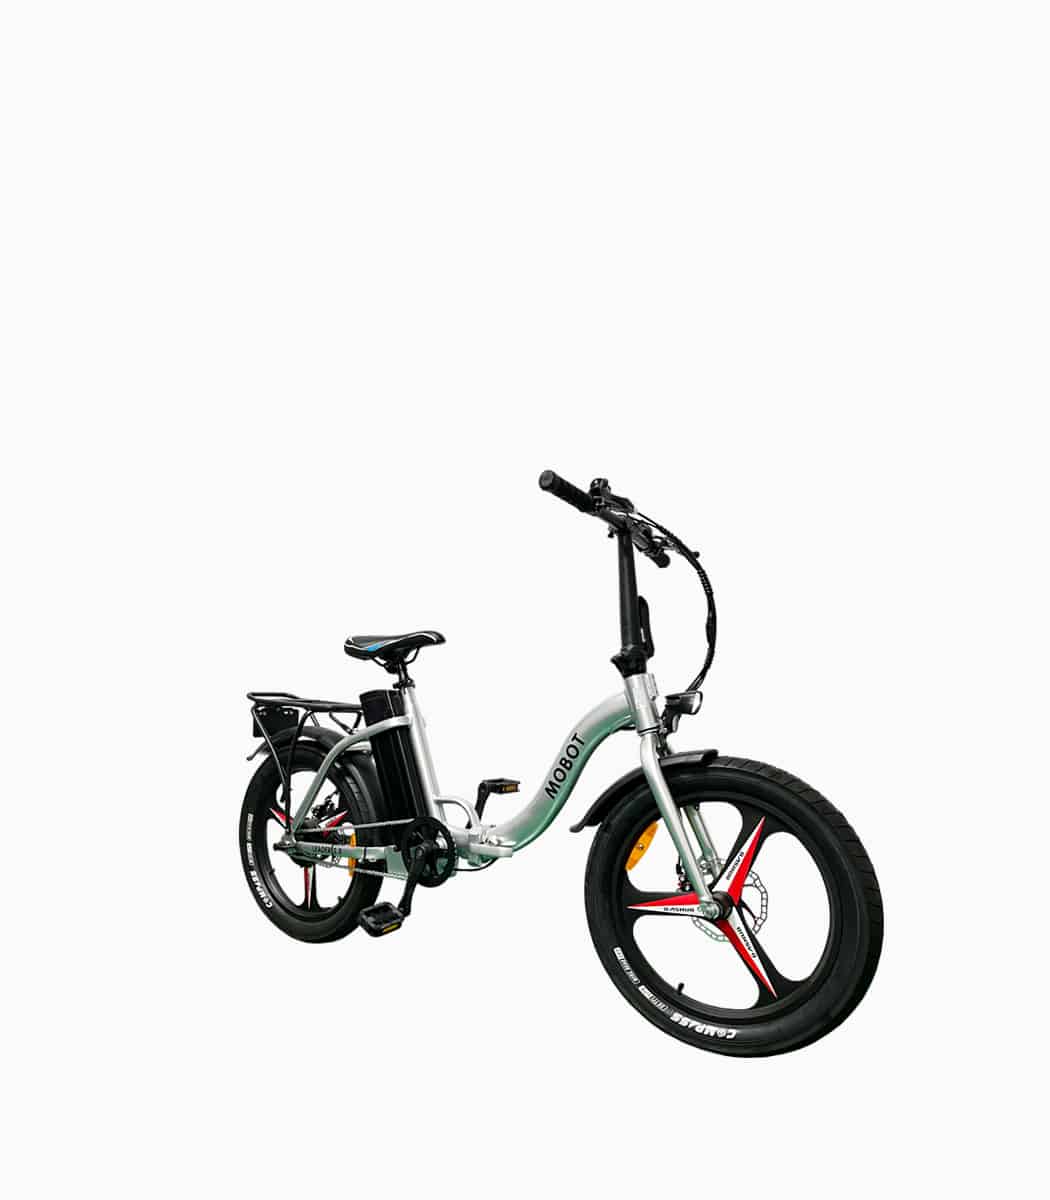 MOBOT Leader 2.0 (Silver15AH) LTA approved electric bicycle angled right